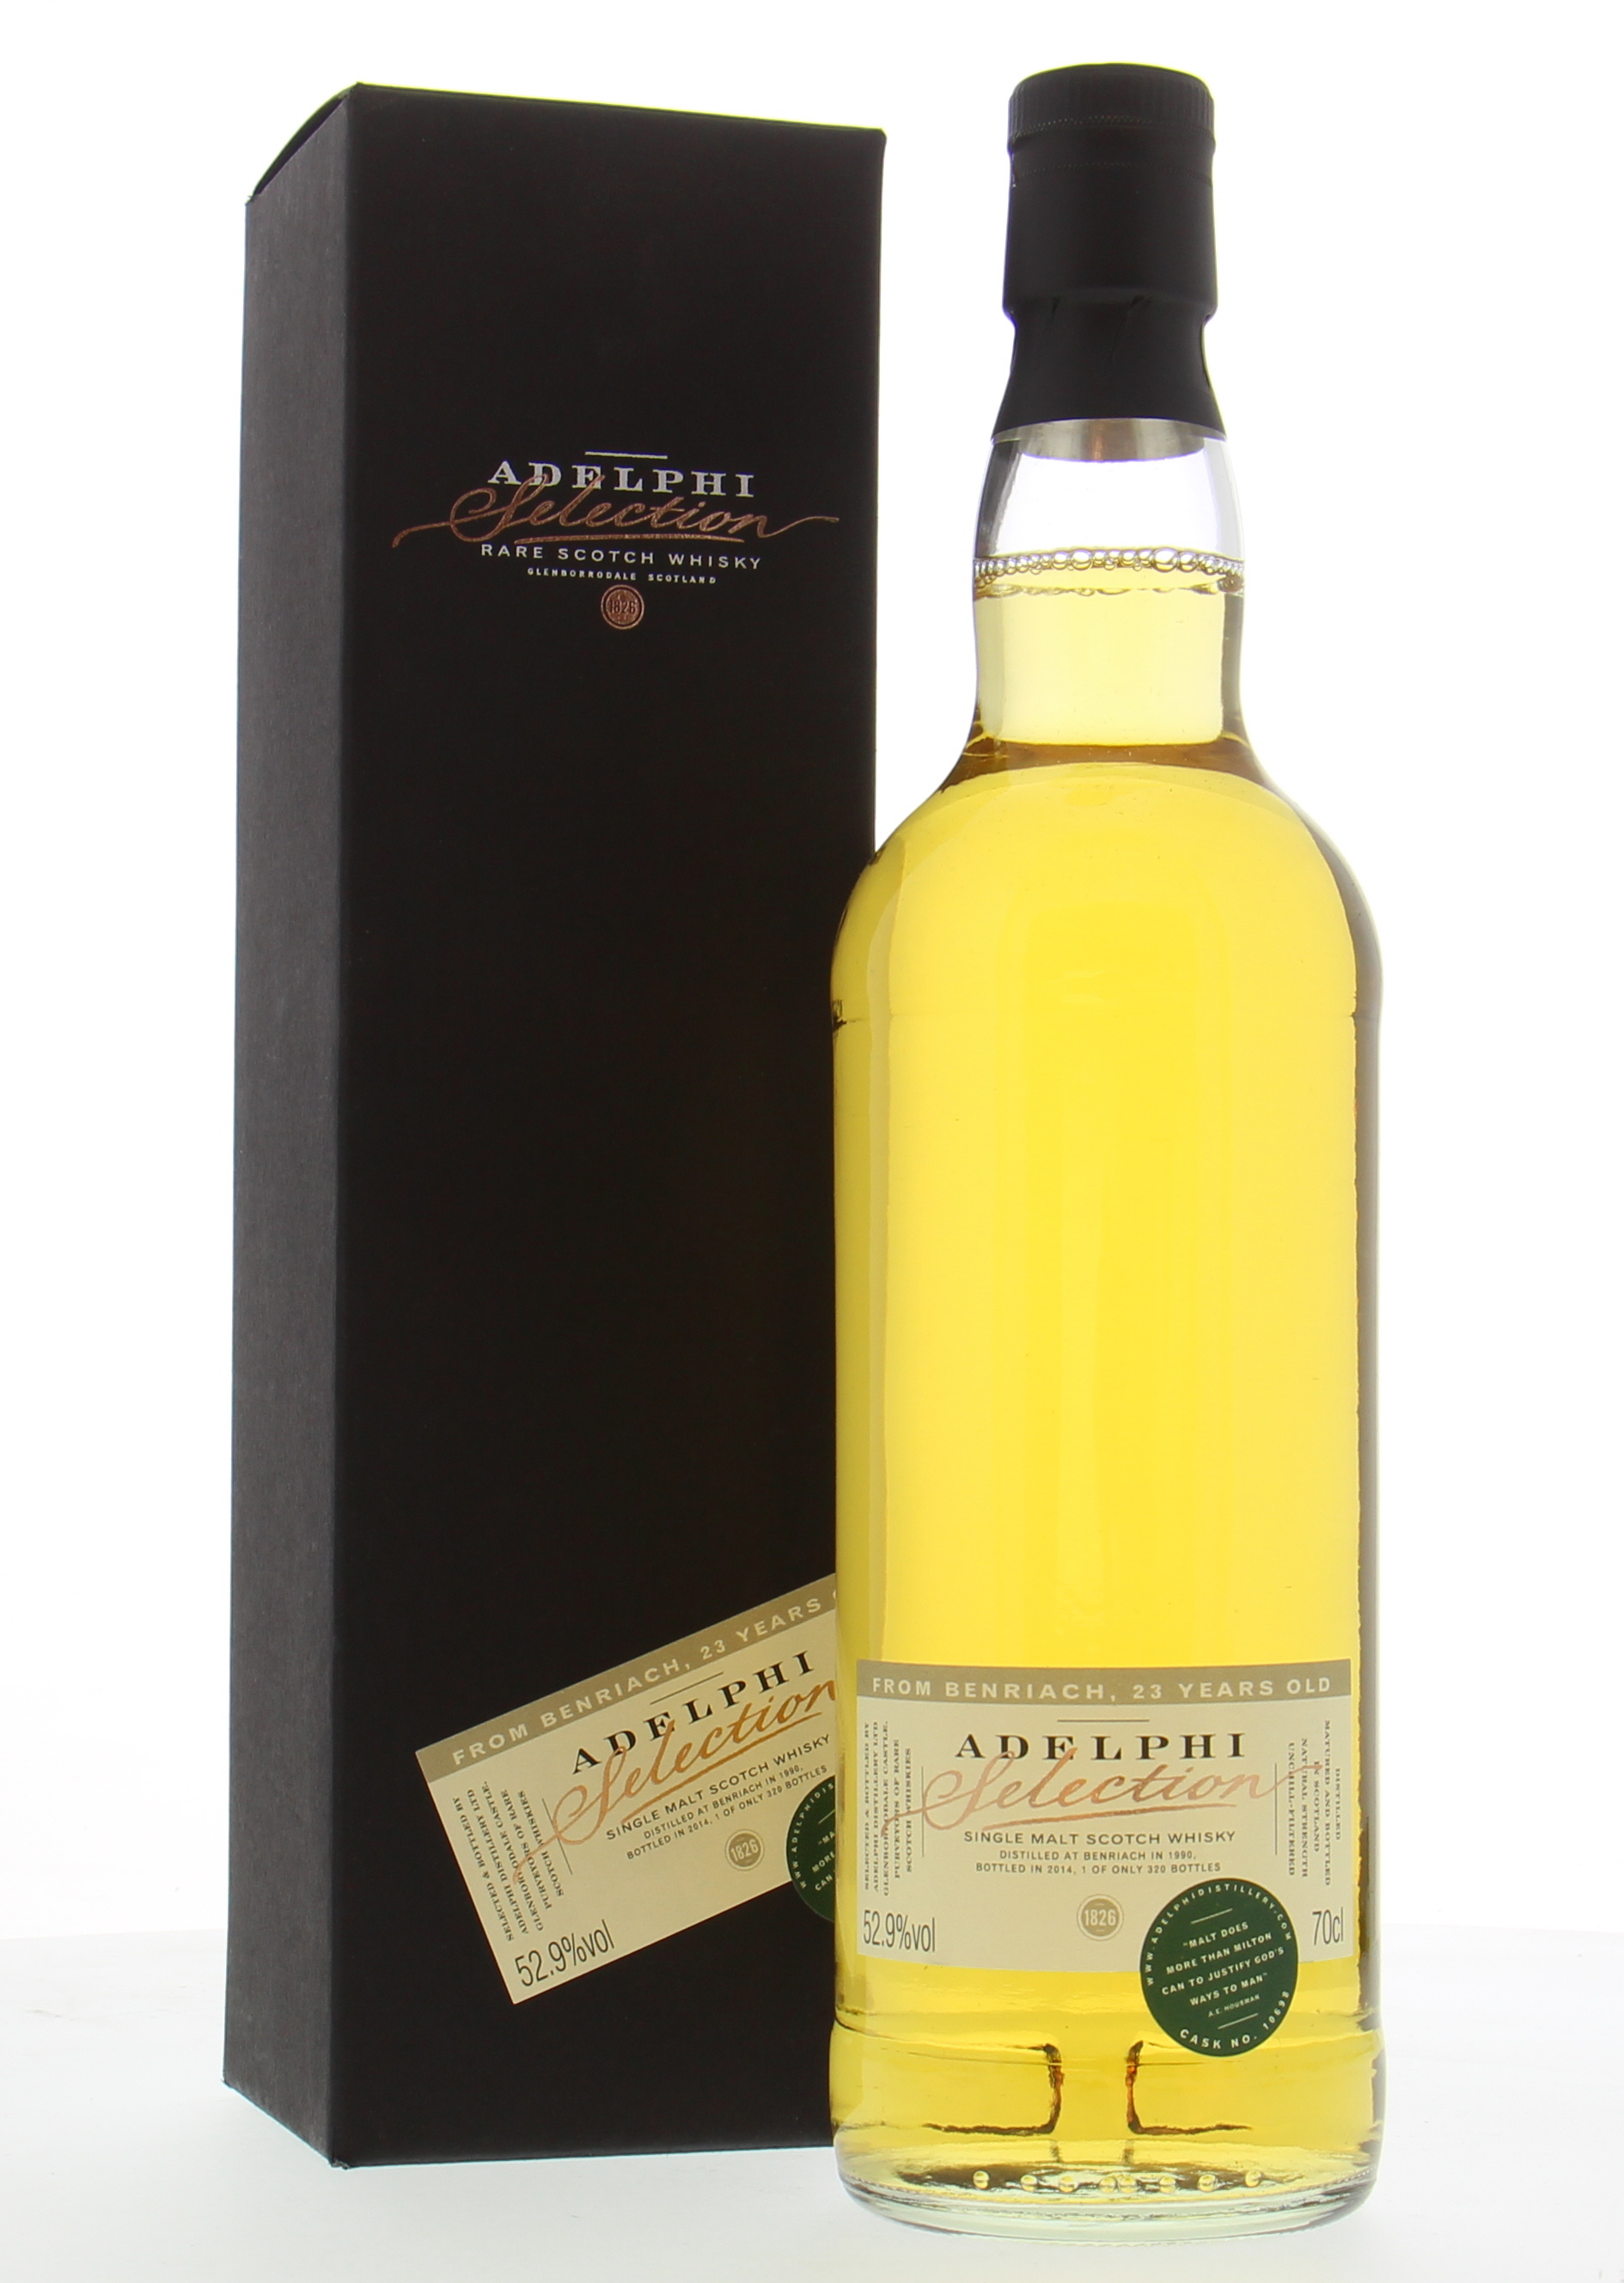 Benriach - 23 Years Old Adelphi Cask 10698 52.9% 1990